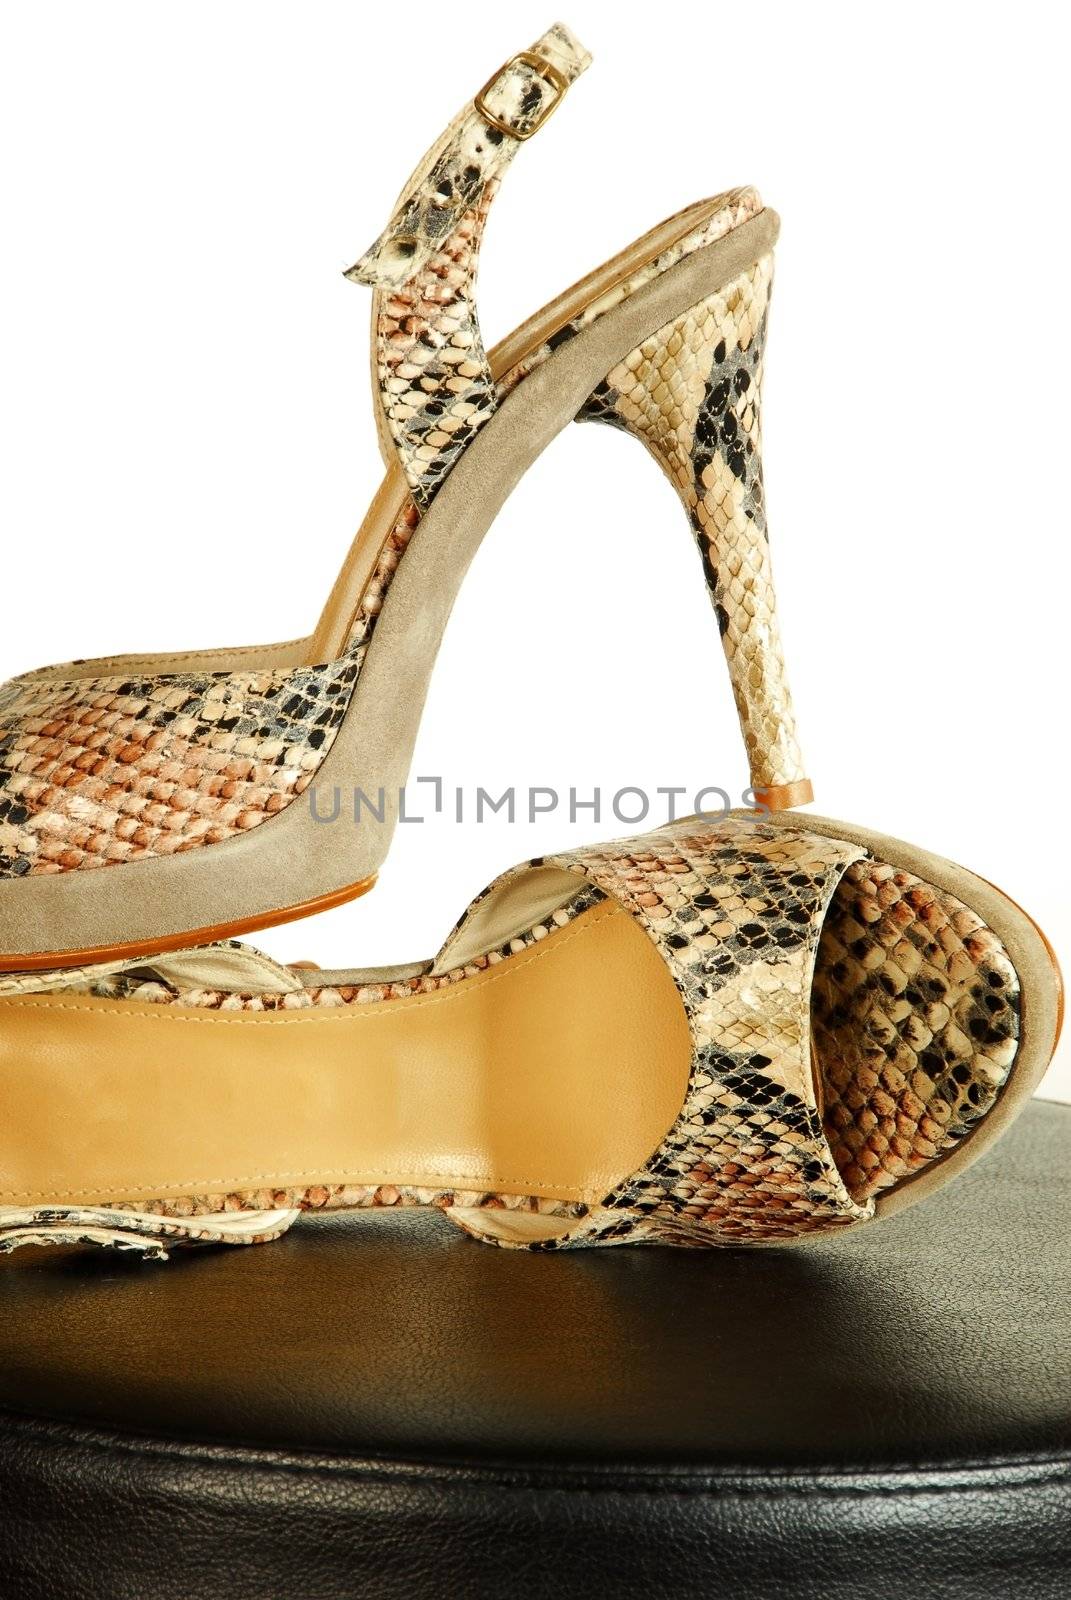 pair of fashionable sexy snake designed high heeled shoes over white